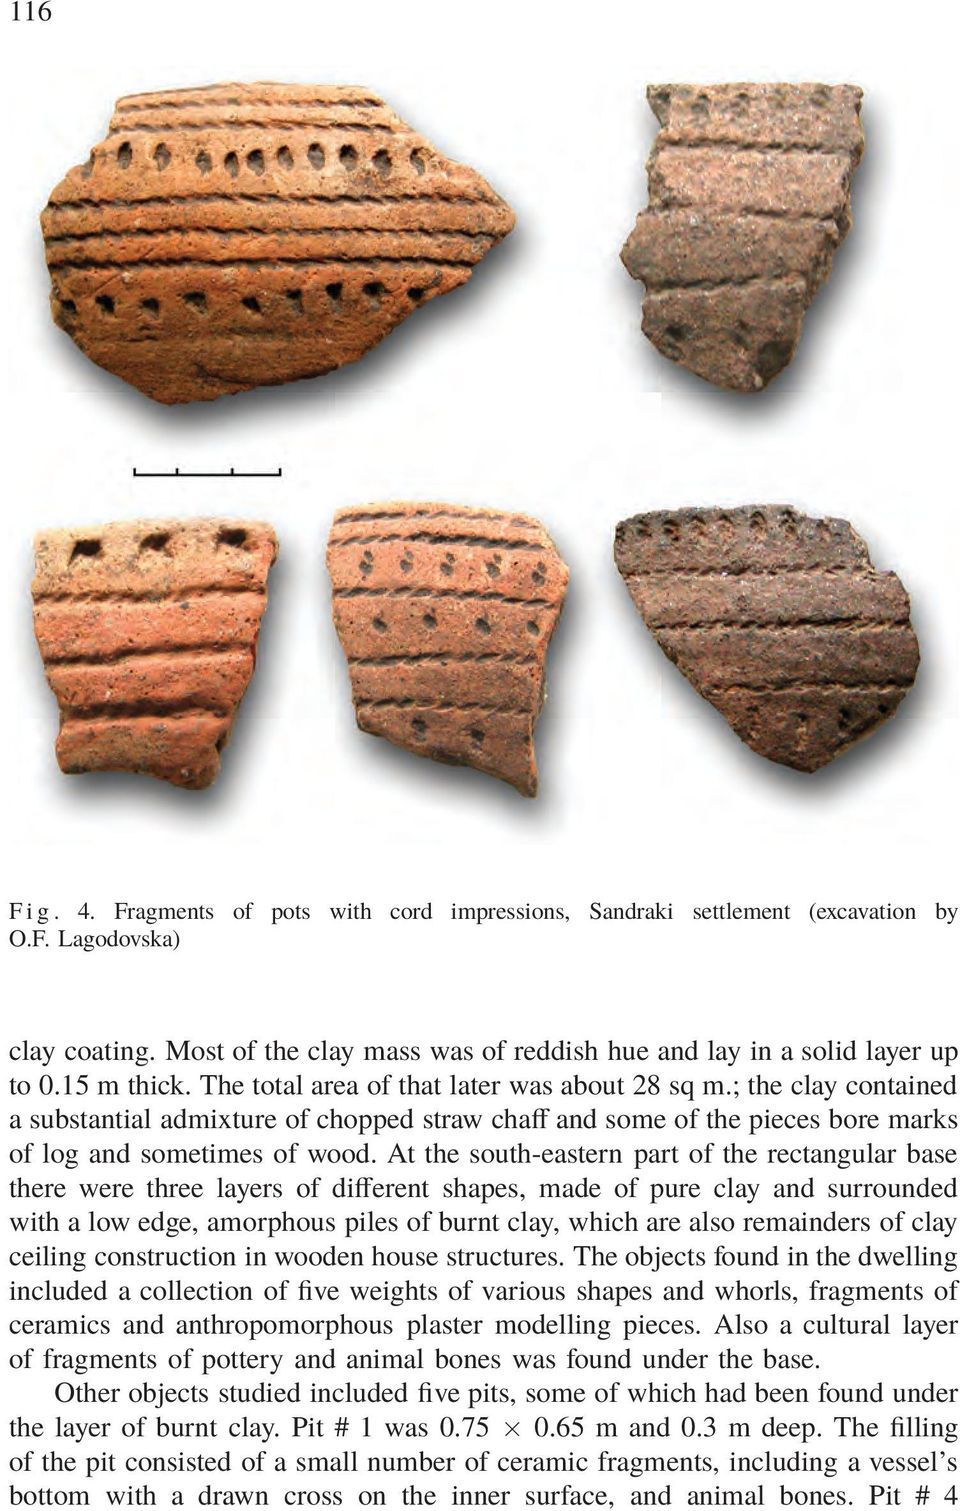 At the south-eastern part of the rectangular base there were three layers of different shapes, made of pure clay and surrounded with a low edge, amorphous piles of burnt clay, which are also